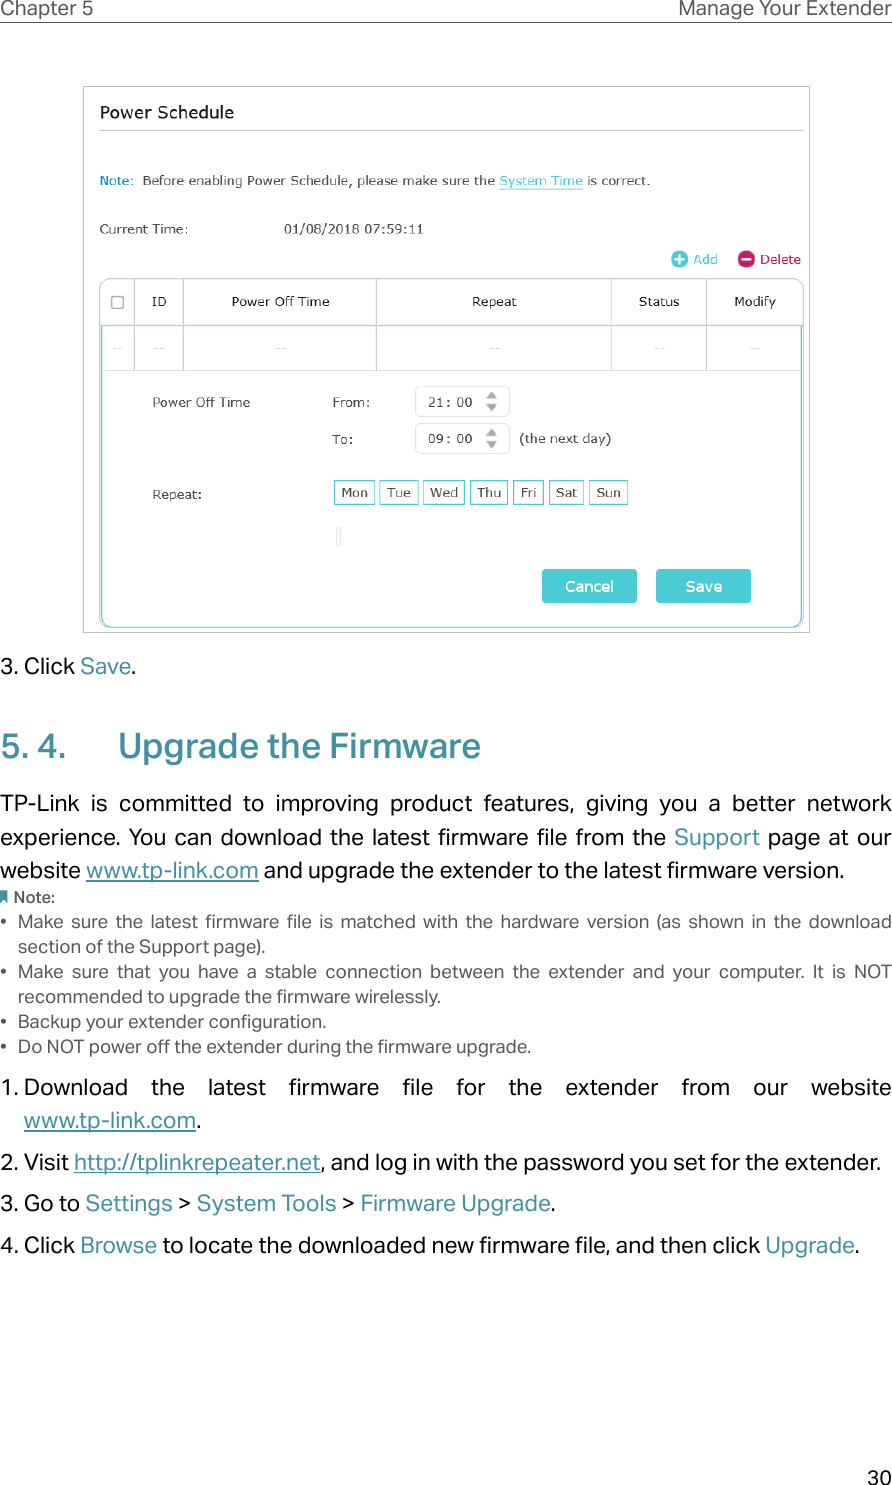 30Chapter 5 Manage Your Extender 3. Click Save. 5. 4.  Upgrade the FirmwareTP-Link is committed to improving product features, giving you a better network experience. You can download the latest firmware file from the Support page at our website www.tp-link.com and upgrade the extender to the latest firmware version.Note: •  Make sure the latest firmware file is matched with the hardware version (as shown in the download section of the Support page).•  Make sure that you have a stable connection between the extender and your computer. It is NOT recommended to upgrade the firmware wirelessly.•  Backup your extender configuration.•  Do NOT power off the extender during the firmware upgrade. 1. Download the latest firmware file for the extender from our website  www.tp-link.com. 2. Visit http://tplinkrepeater.net, and log in with the password you set for the extender.3. Go to Settings &gt; System Tools &gt; Firmware Upgrade.4. Click Browse to locate the downloaded new firmware file, and then click Upgrade. 